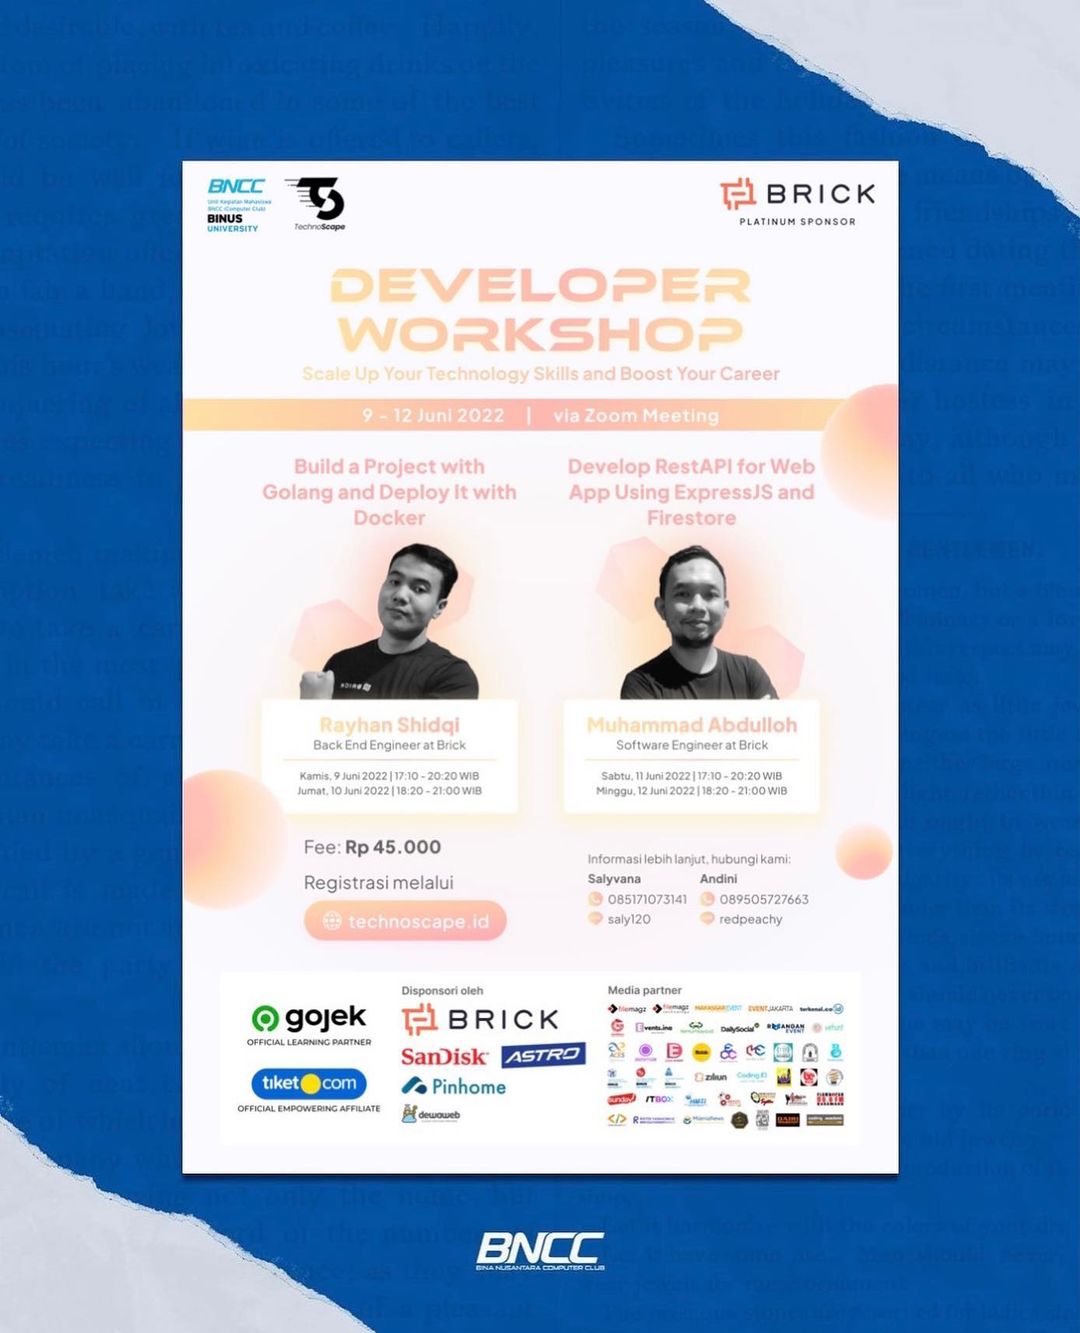 Developer Workshop: Scale Up Your Technology Skills and Boost Your Career